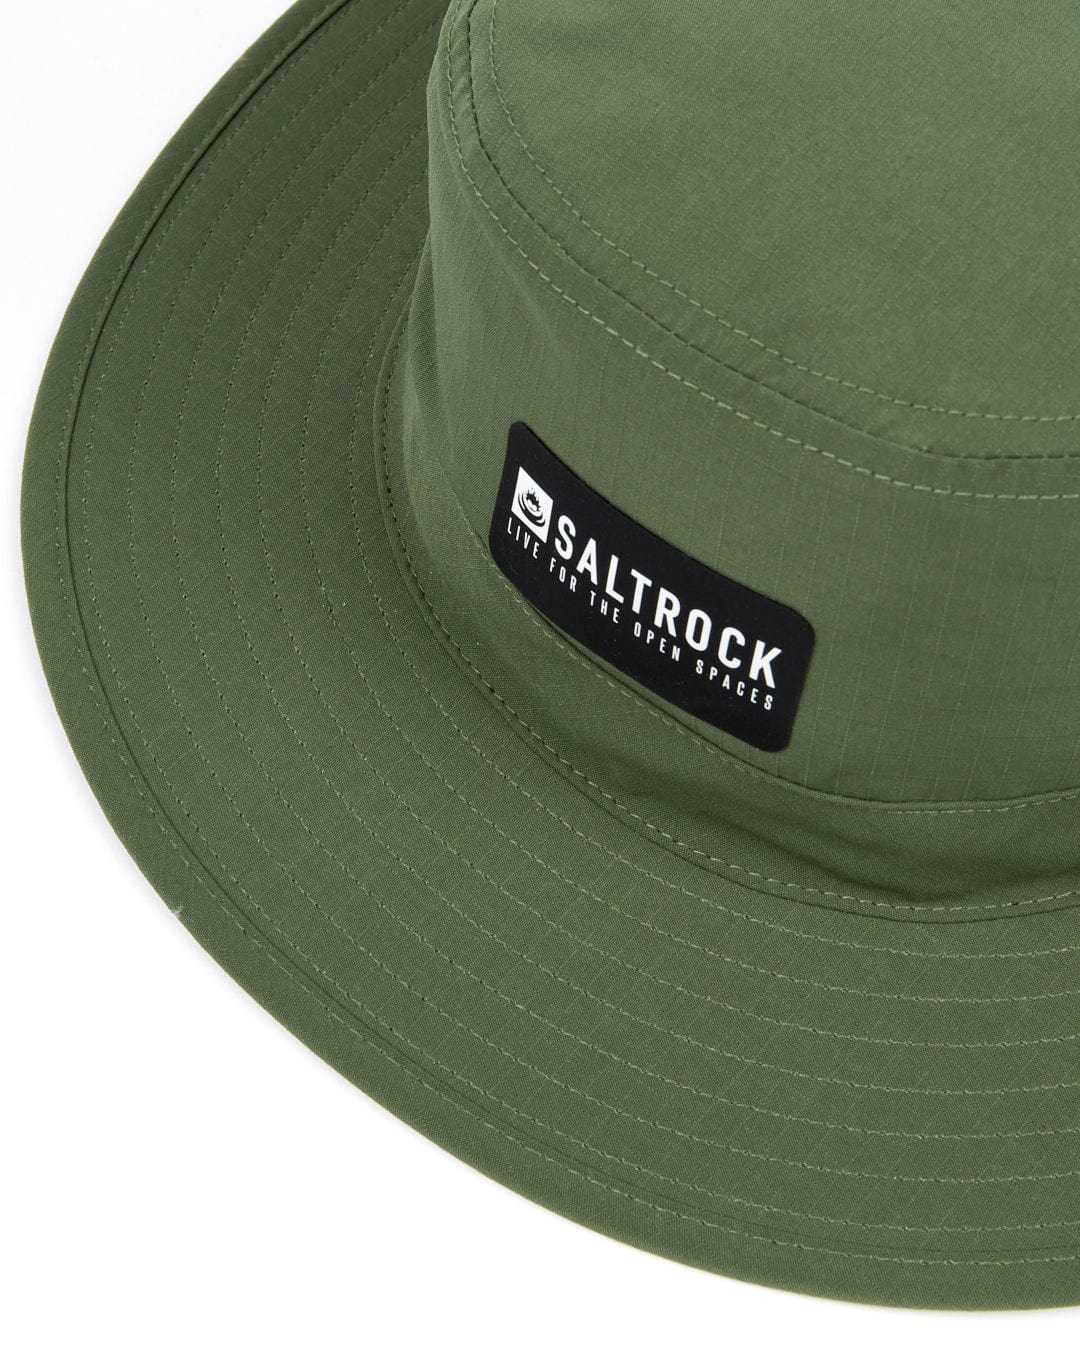 A Saltrock green Gaitor bucket hat with a logo and an adjustable drawstring chin strap.